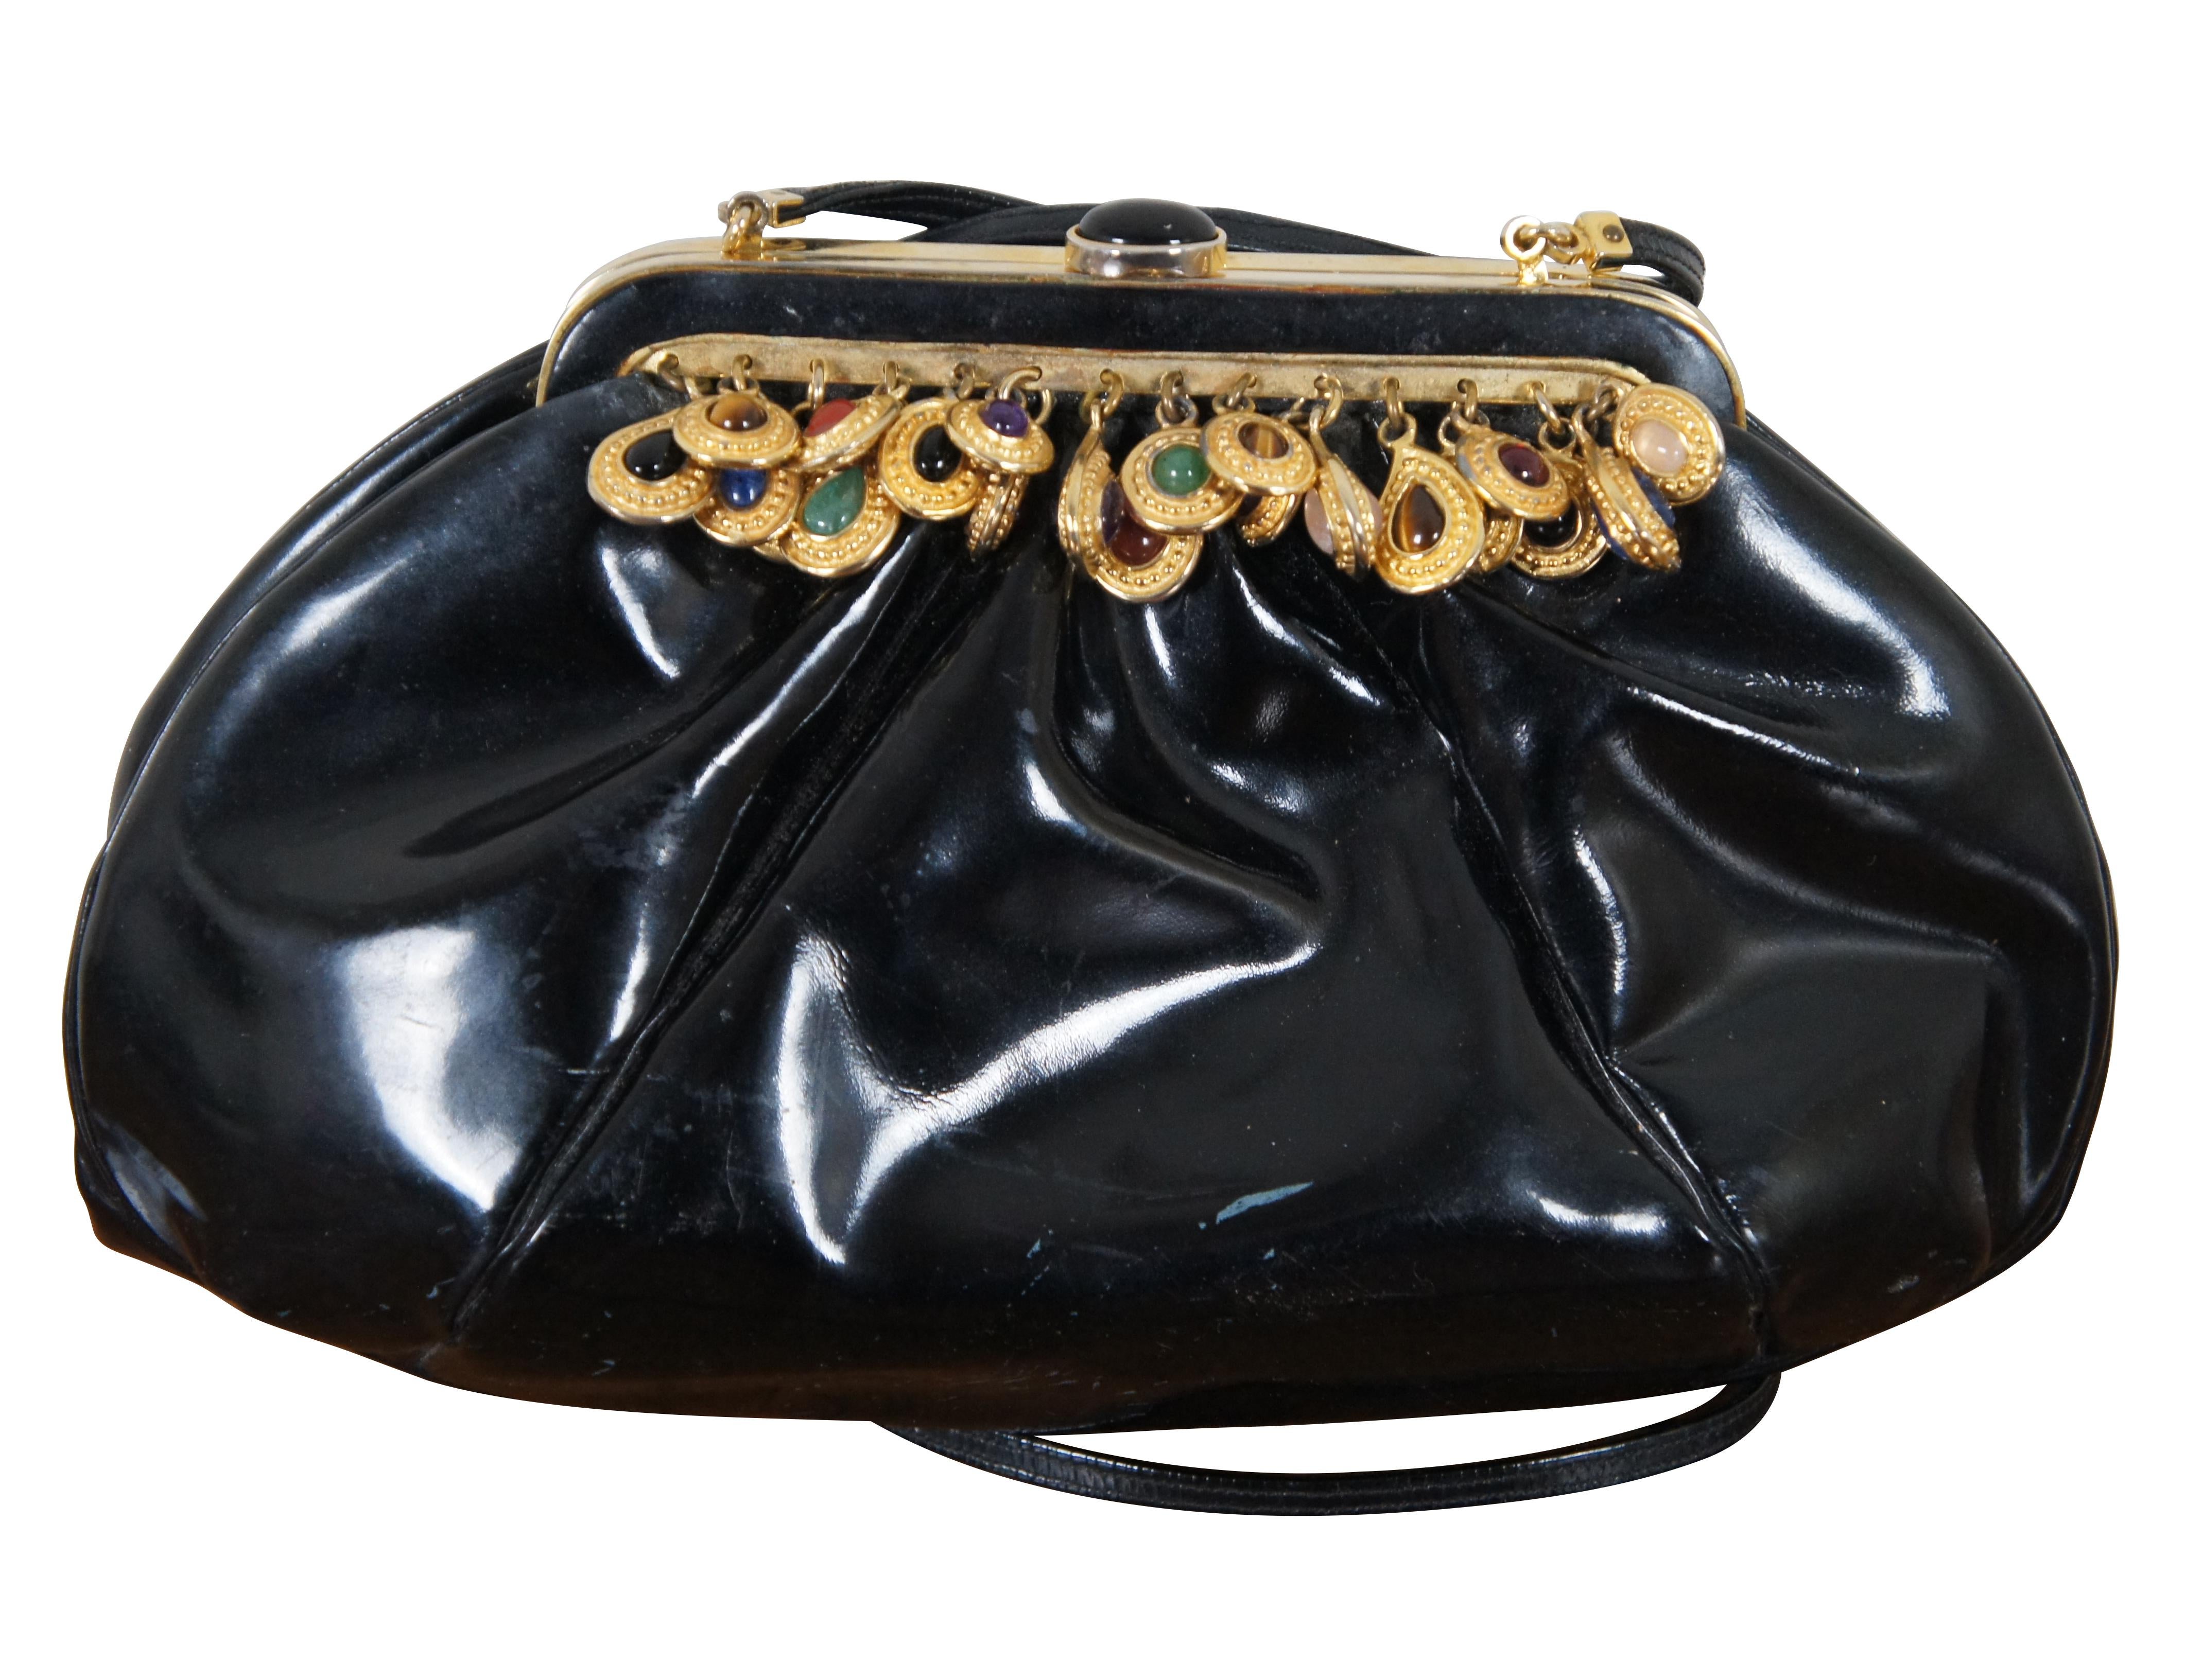 Vintage circa 1980s Judith Leiber black patent leather purse accented with multi-color jeweled charms along the clamshell clasp, featuring a thin shoulder strap, coin purse matching the red interior, and gold tone magnifying / double sided pocket